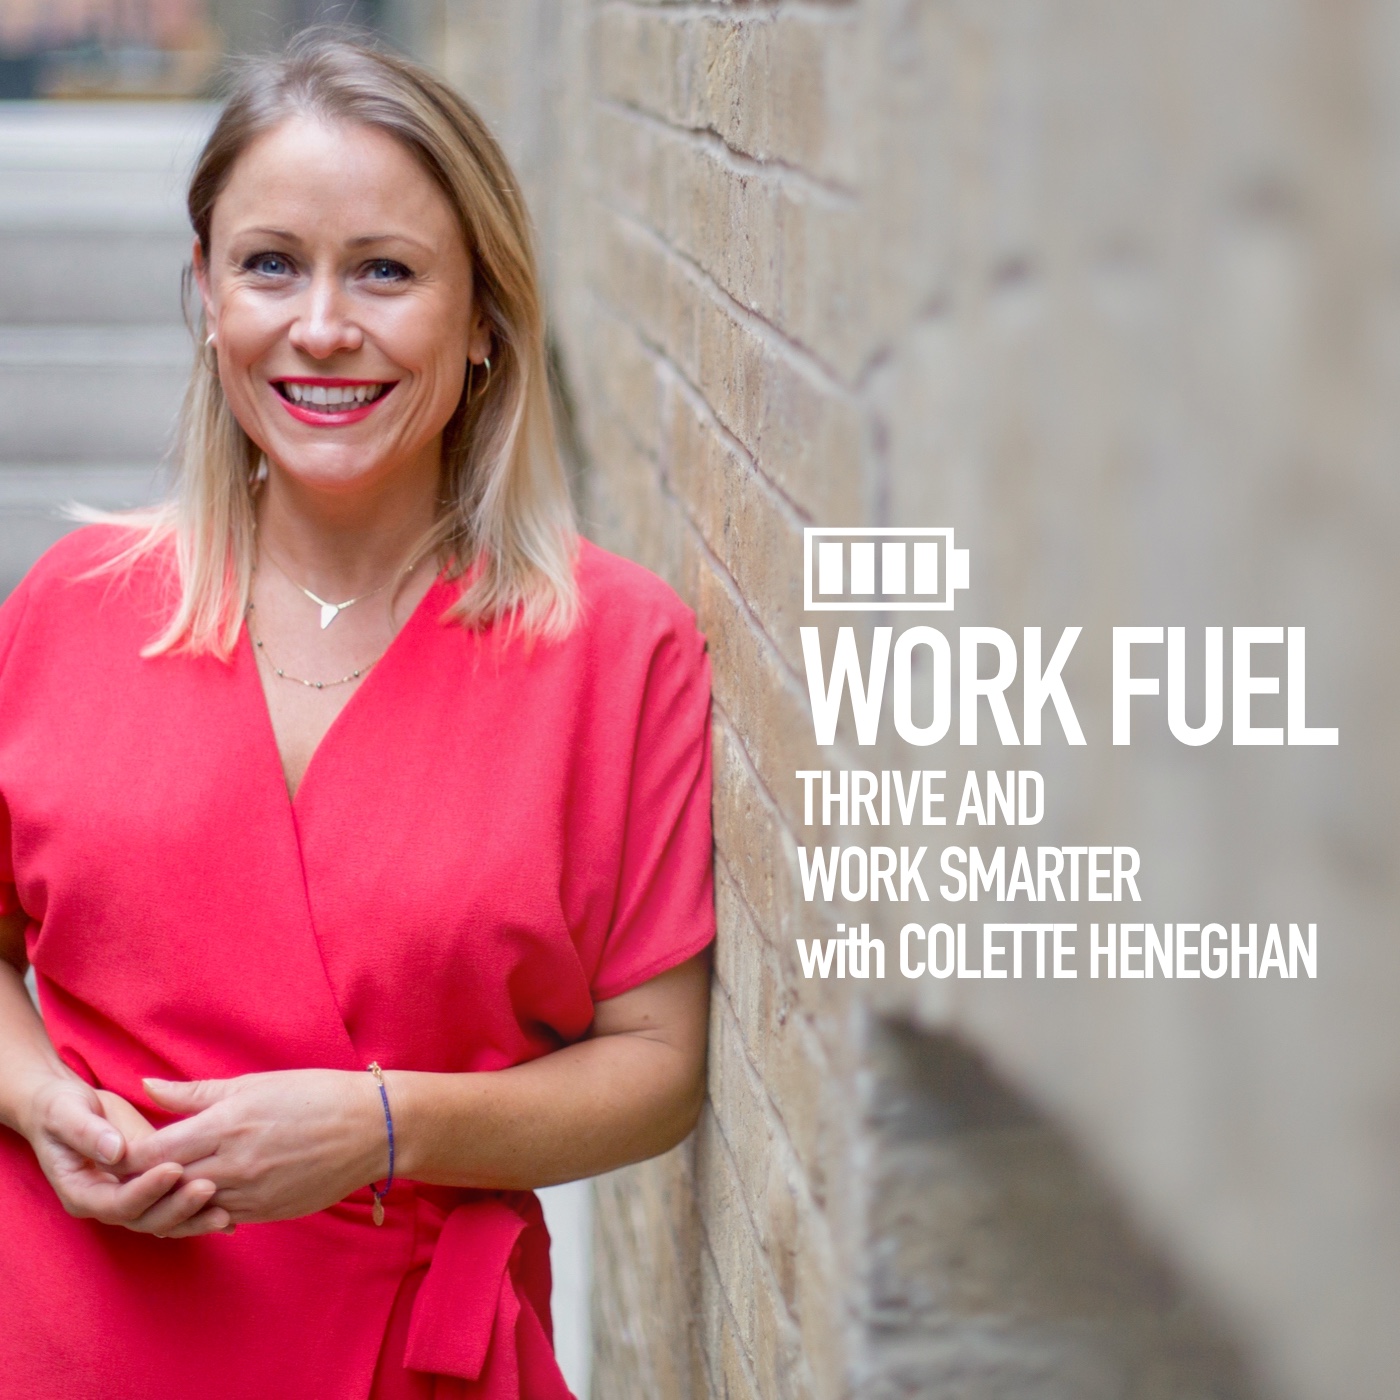 Being the architect of your own working day, with Lucy Gower